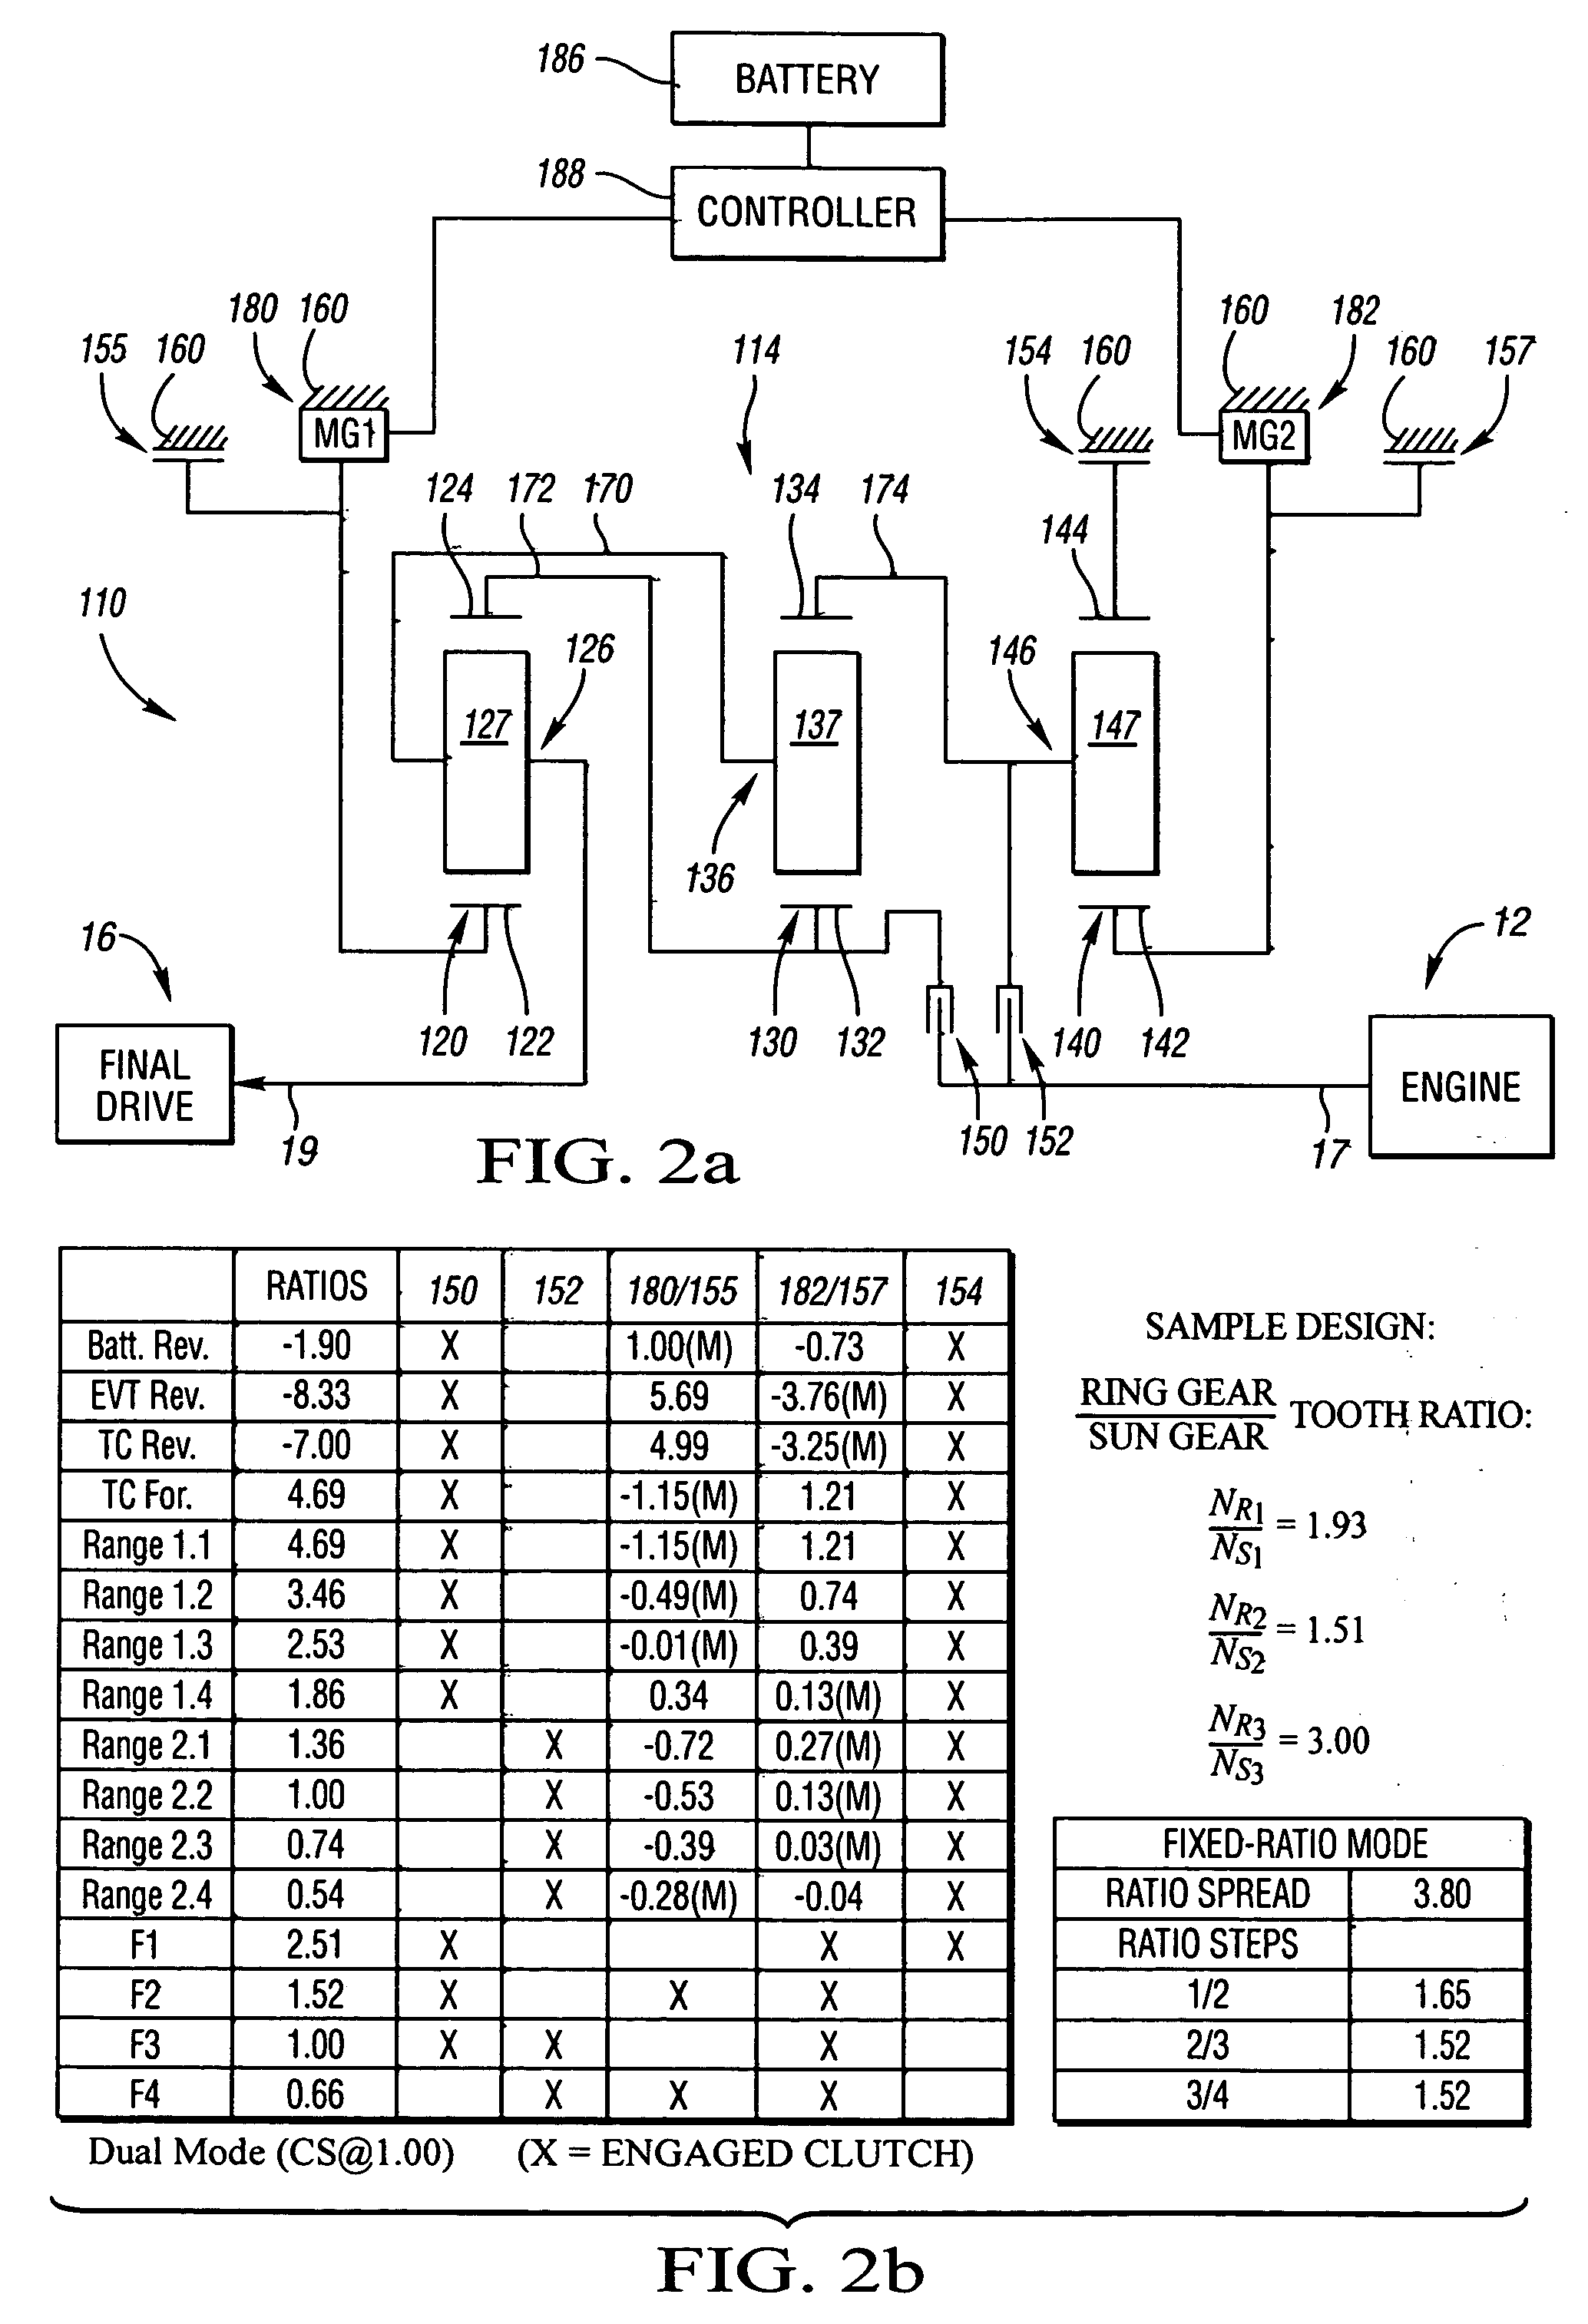 Electrically variable transmission having two or three planetary gear sets with two or three fixed interconnections